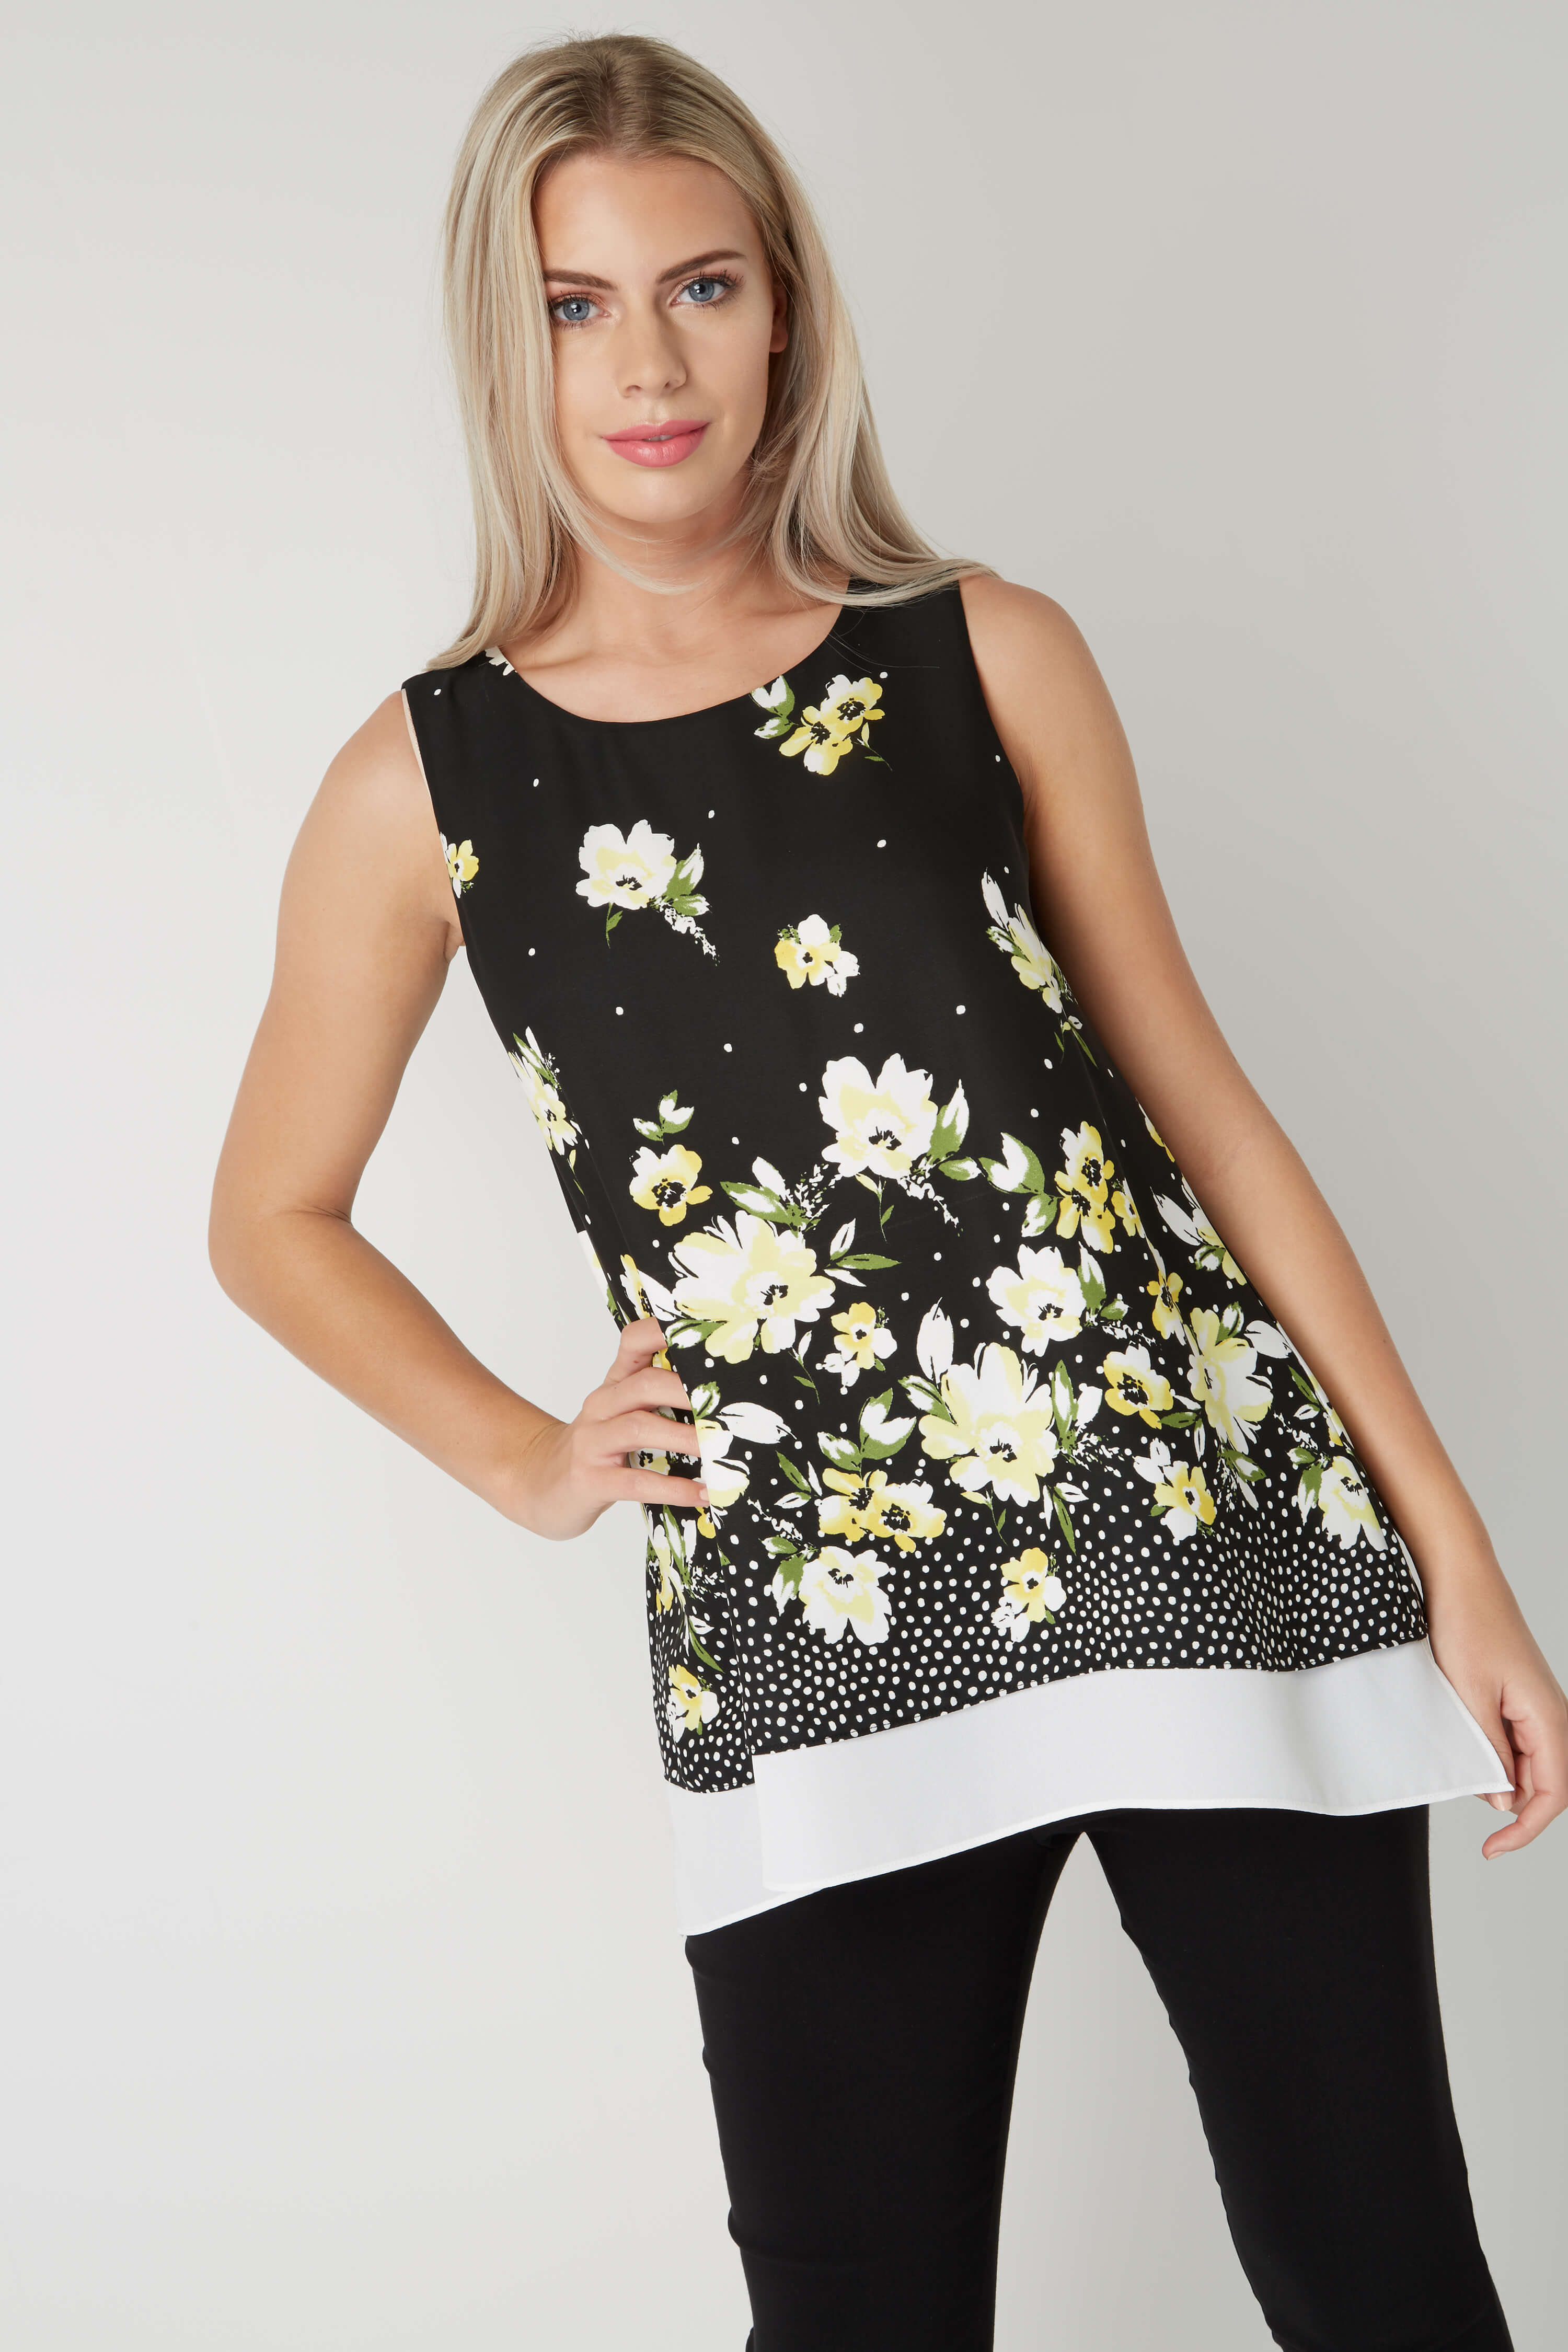 Black Floral Print Overlay Top, Image 2 of 5